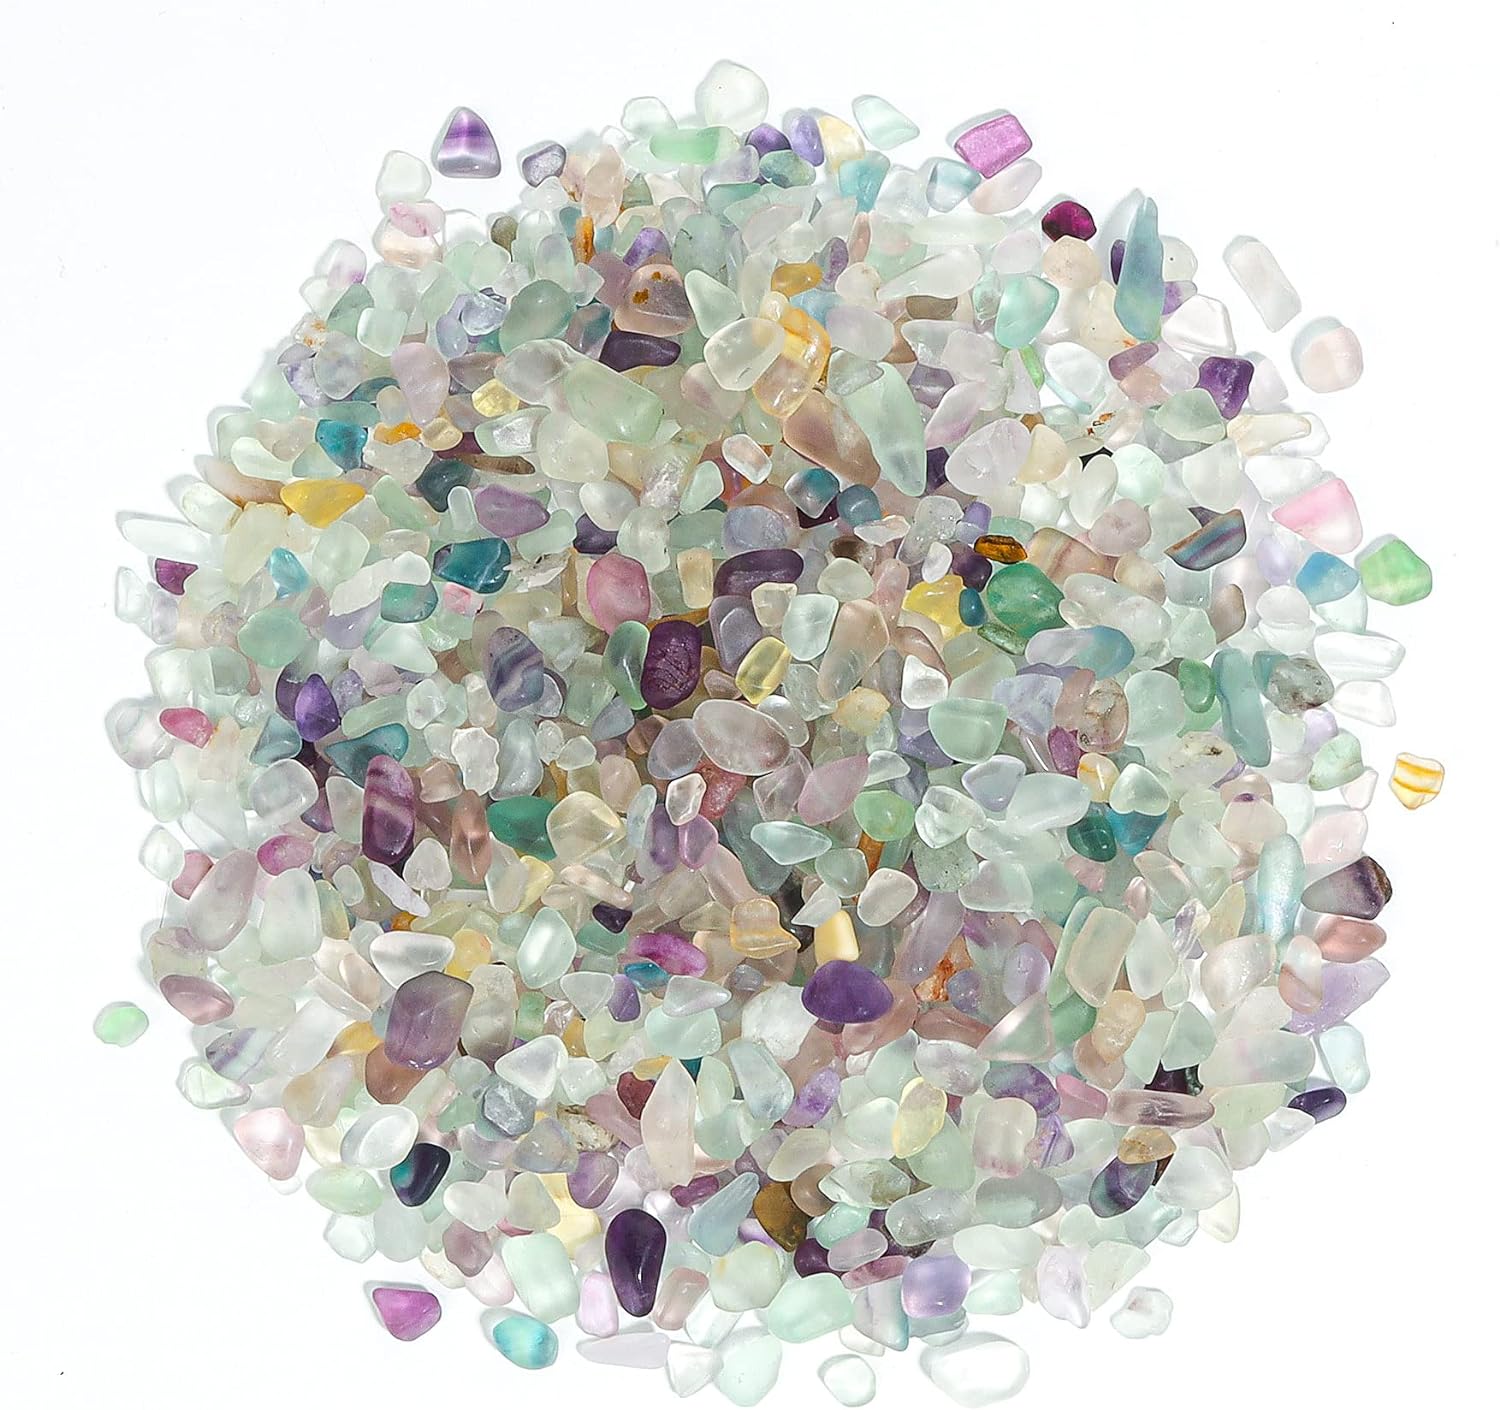 Crushed Glass for Crafts Broken Glass Pieces Decorative Reflective